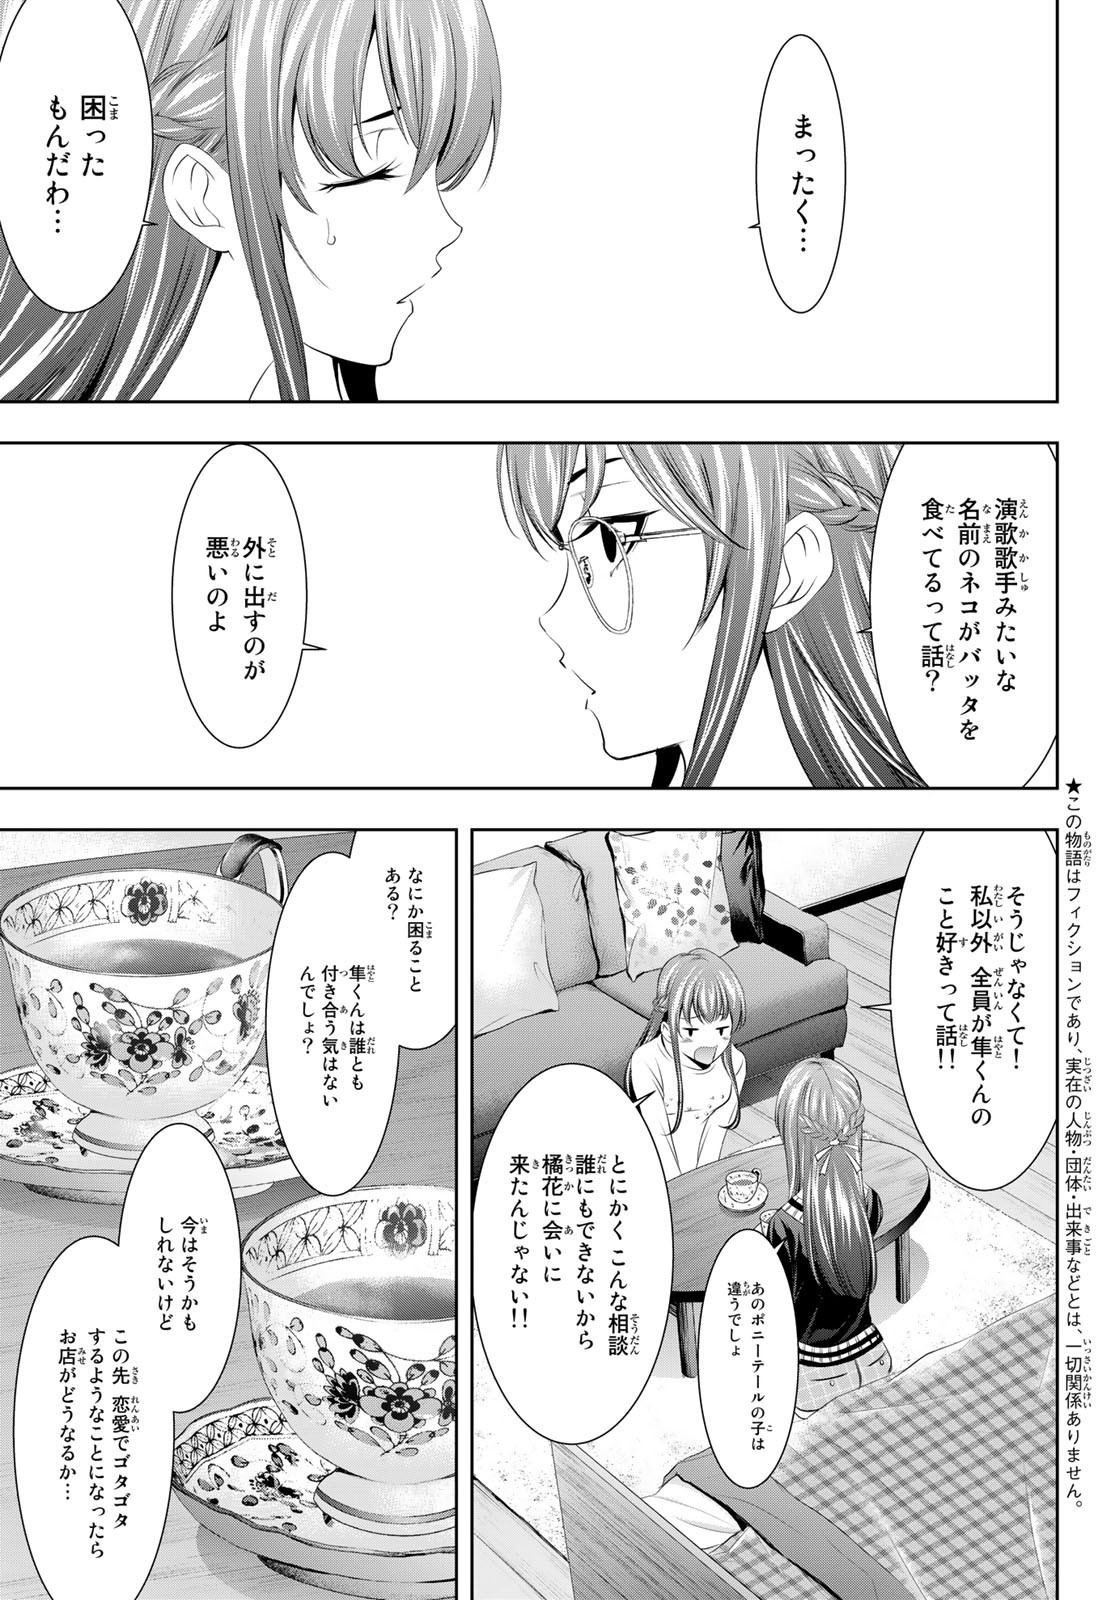 Goddess-Cafe-Terrace - Chapter 046 - Page 3